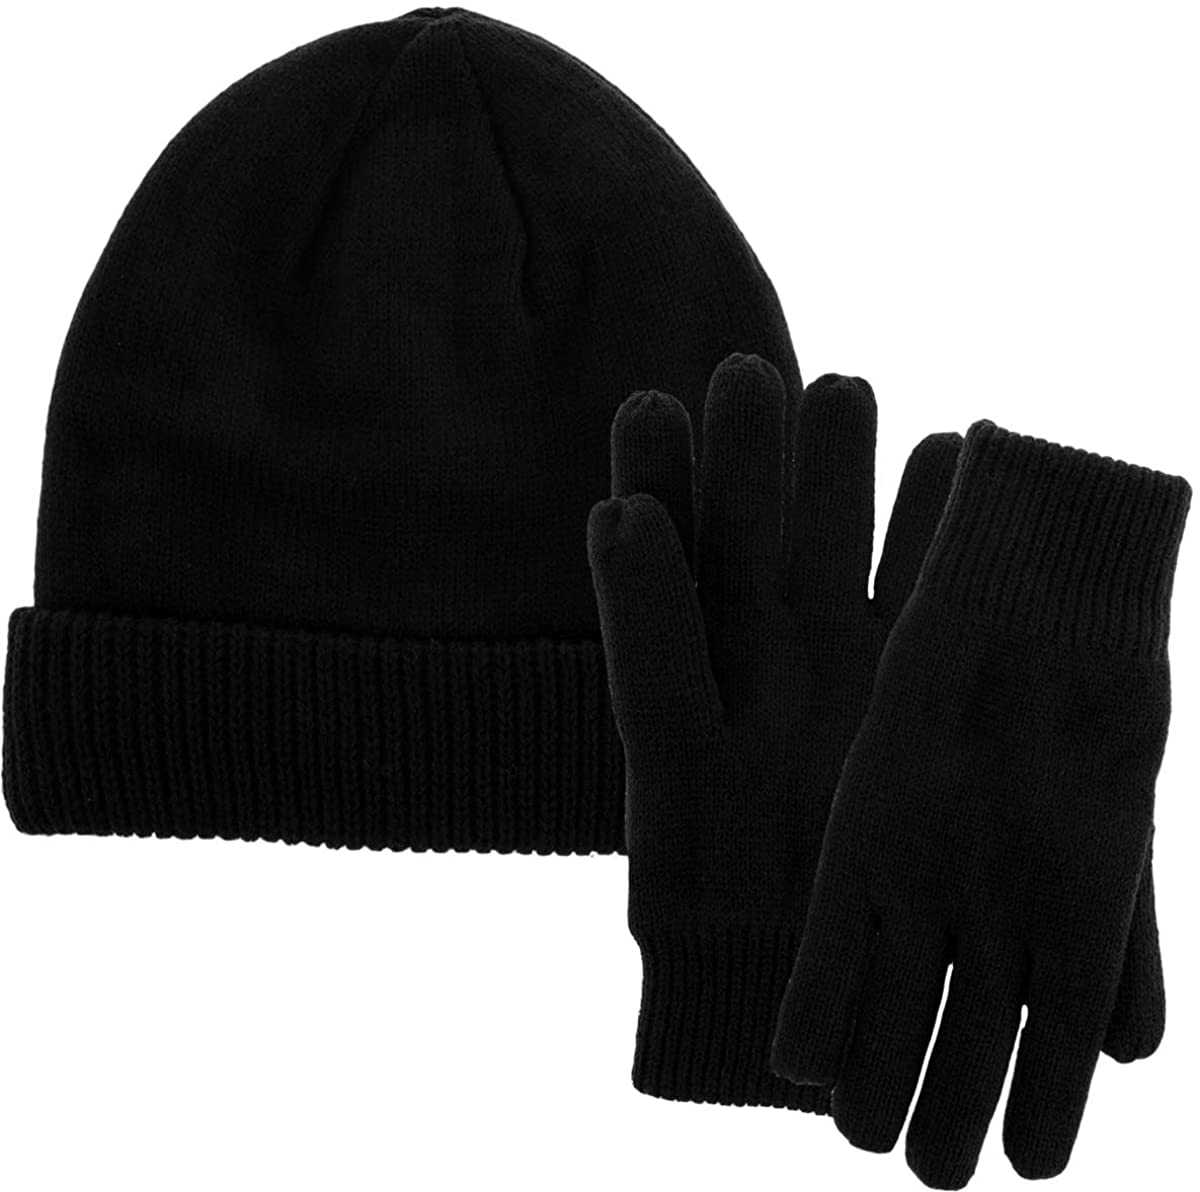 Winter Clothing & Hand Warmers